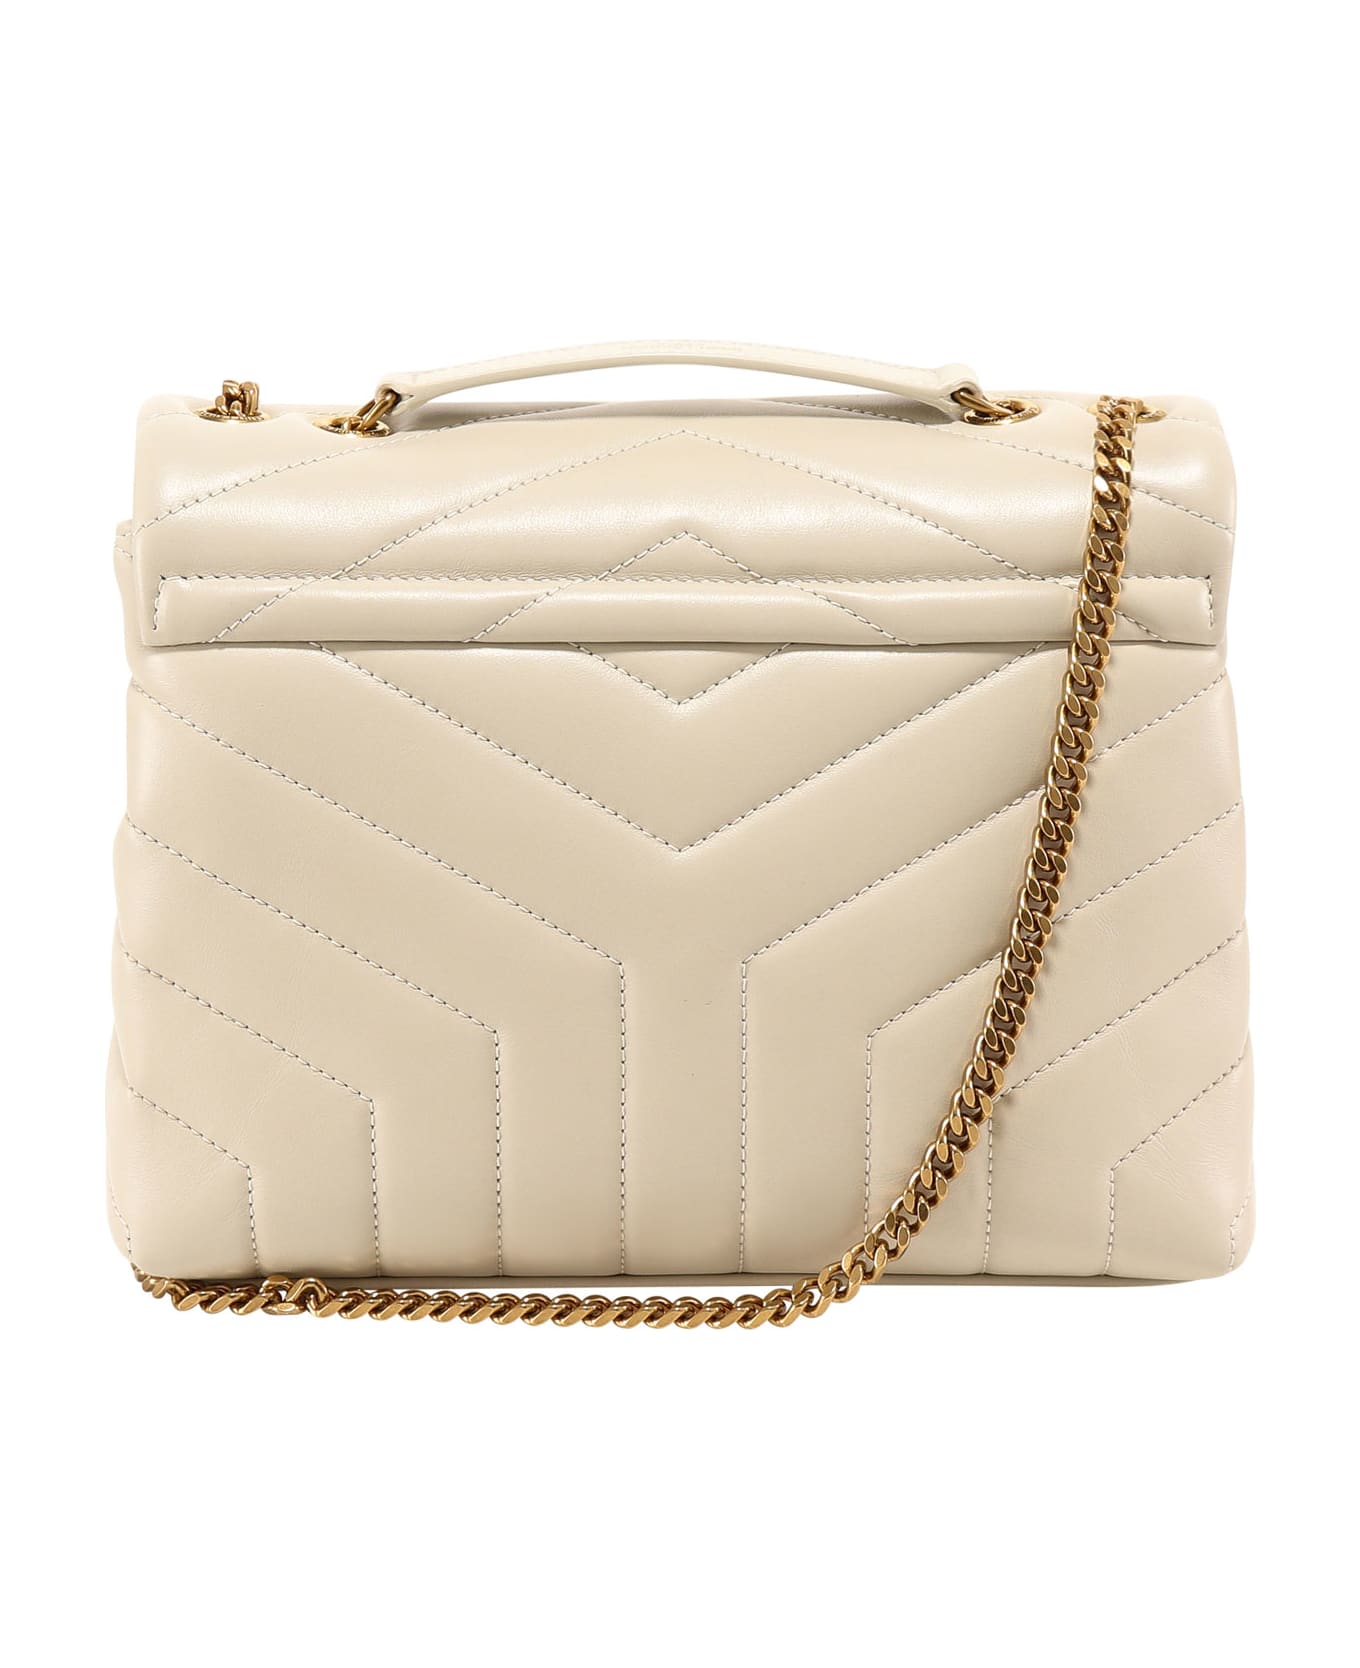 Saint Laurent Small Loulou Bag In Quilted Leather - White